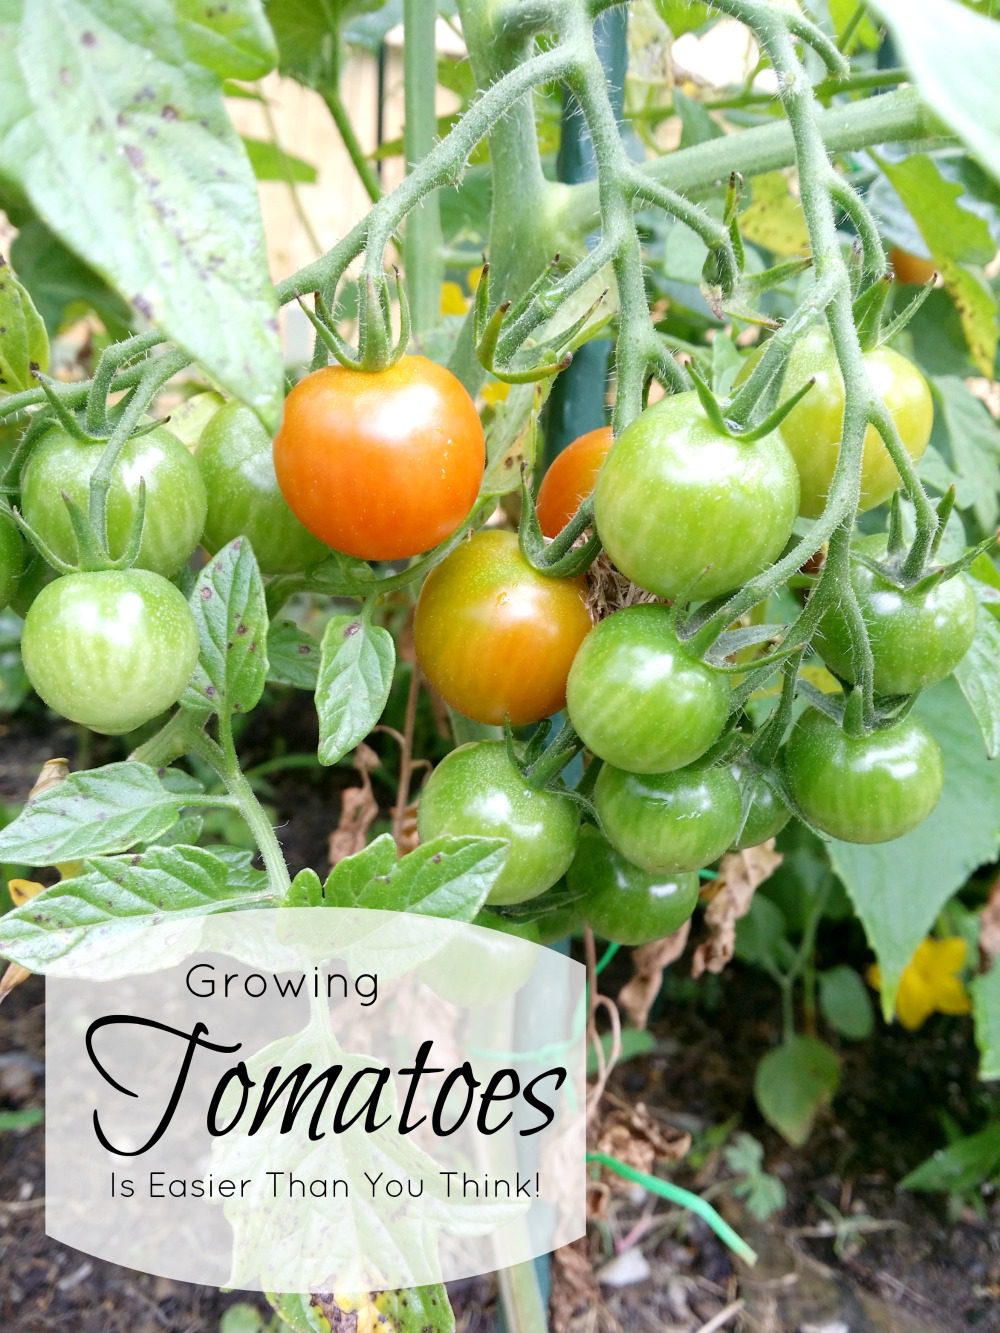 Growing Tomatoes is Easier Than You Think